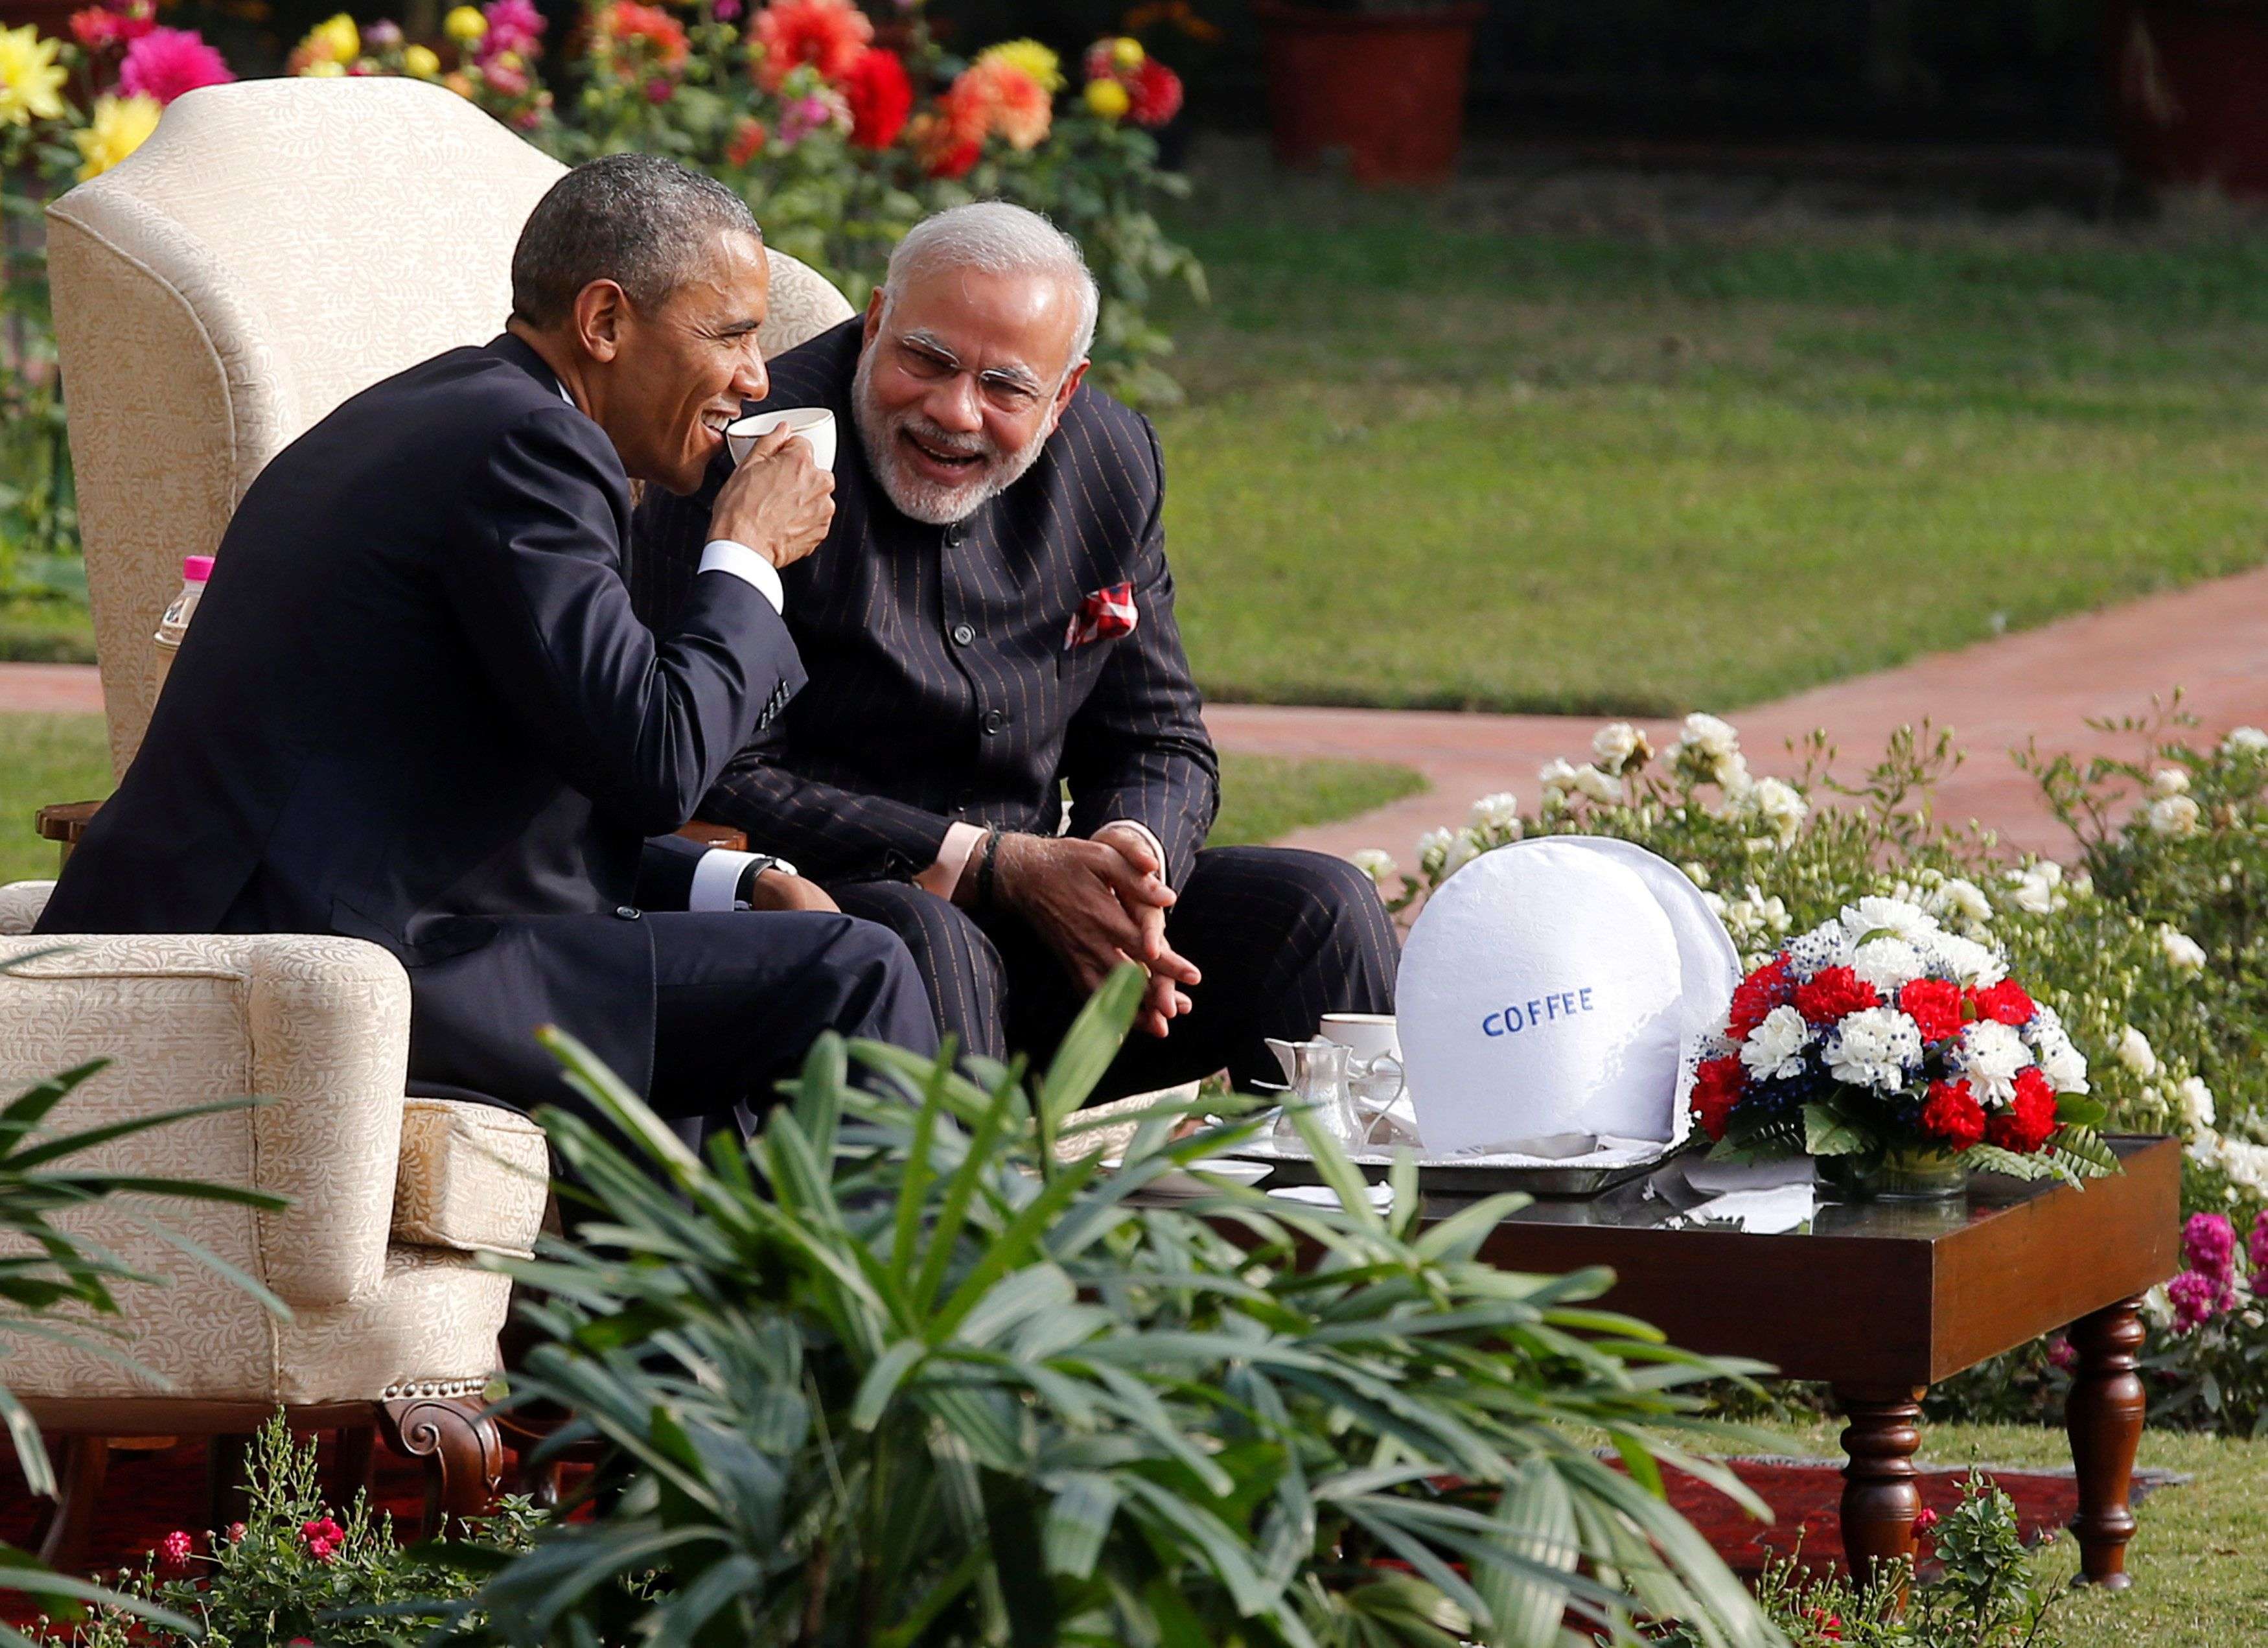 U.S. President Obama and India's PM Modi talk as they have coffee and tea together in the gardens at Hyderabad House in New Delhi